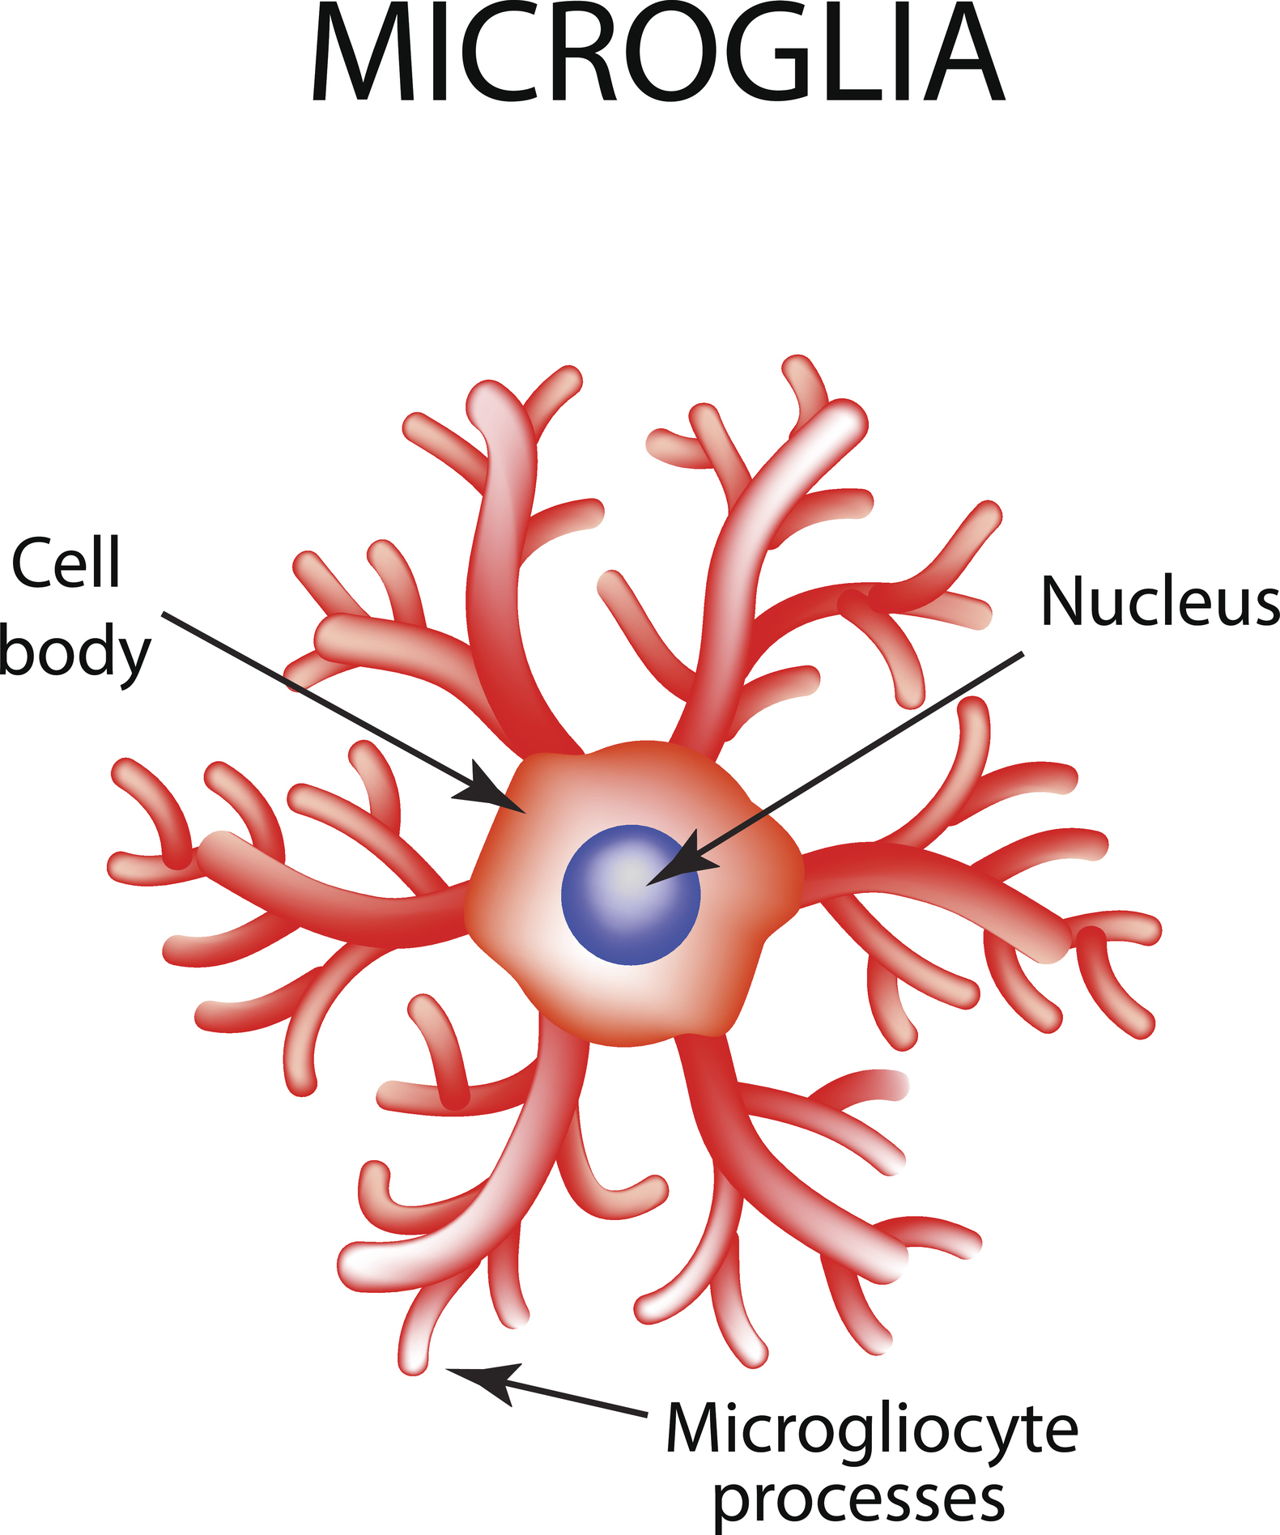 A Labeled Diagram That Explains the Function of Nucleolus - Biology Wise